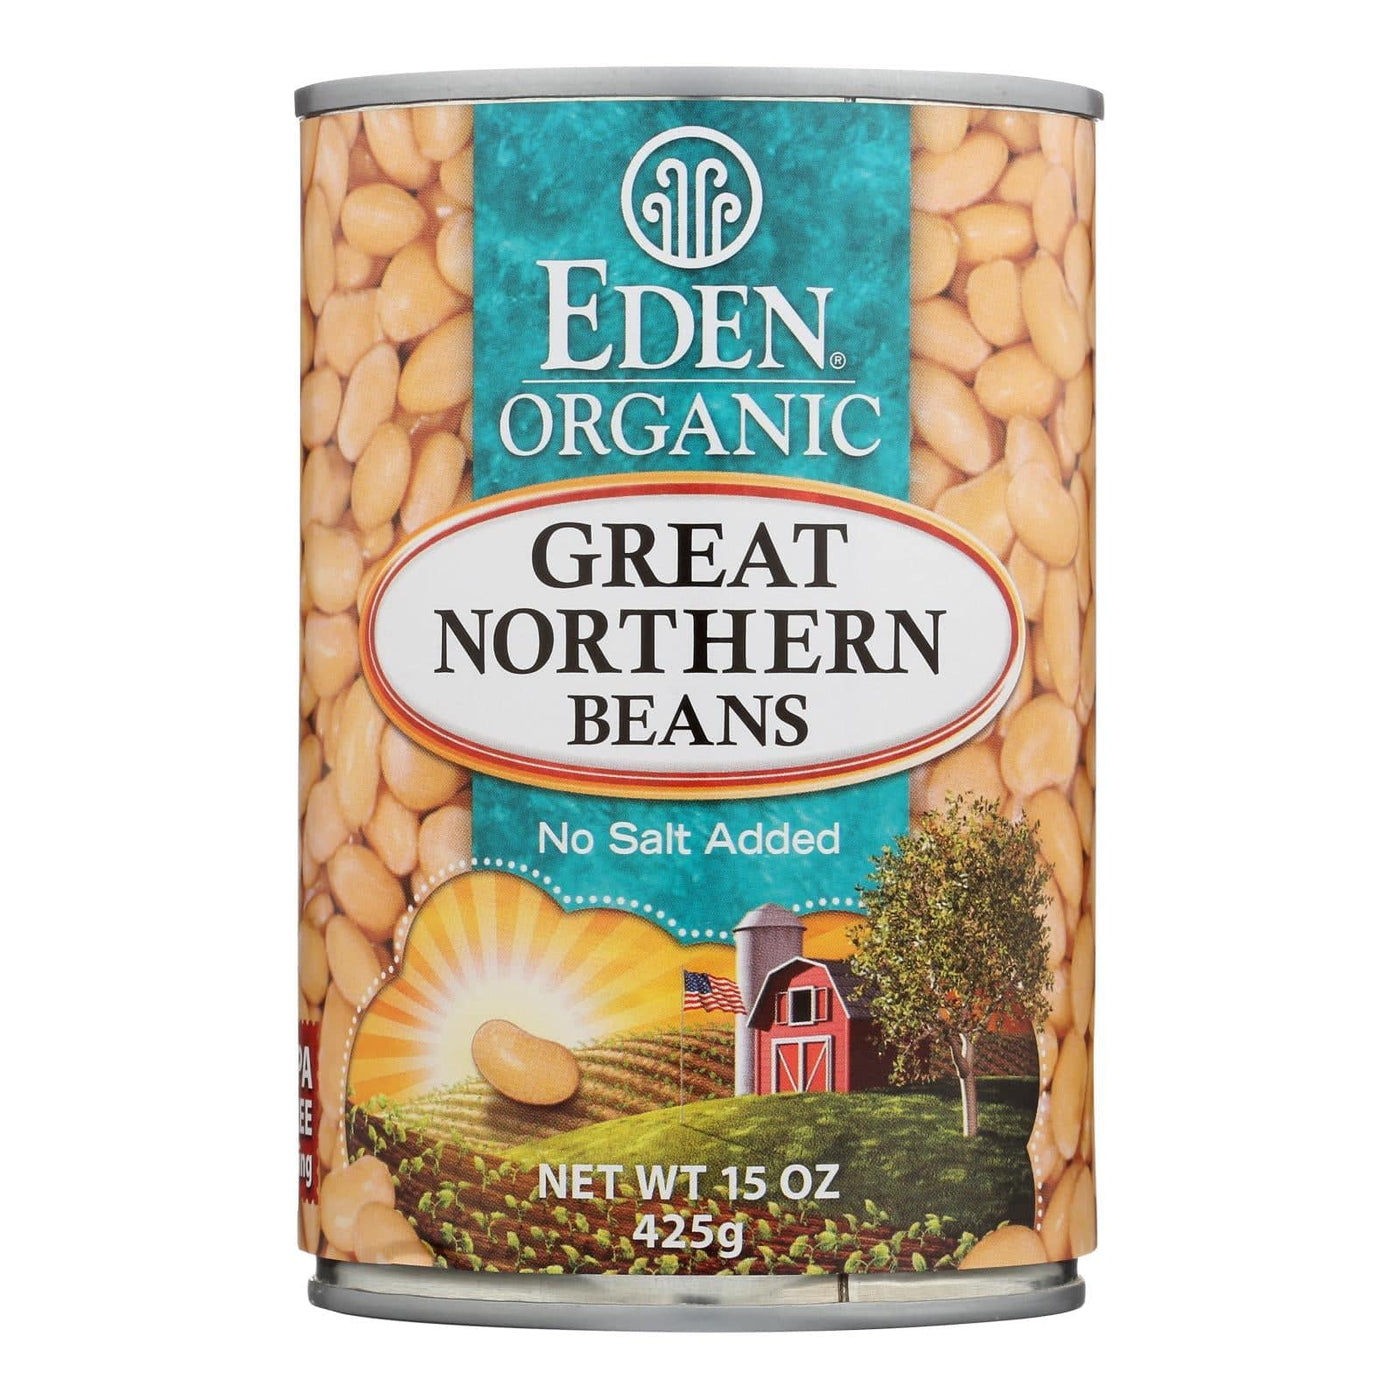 Buy Eden Foods Great Northern Beans Organic - Case Of 12 - 15 Oz.  at OnlyNaturals.us